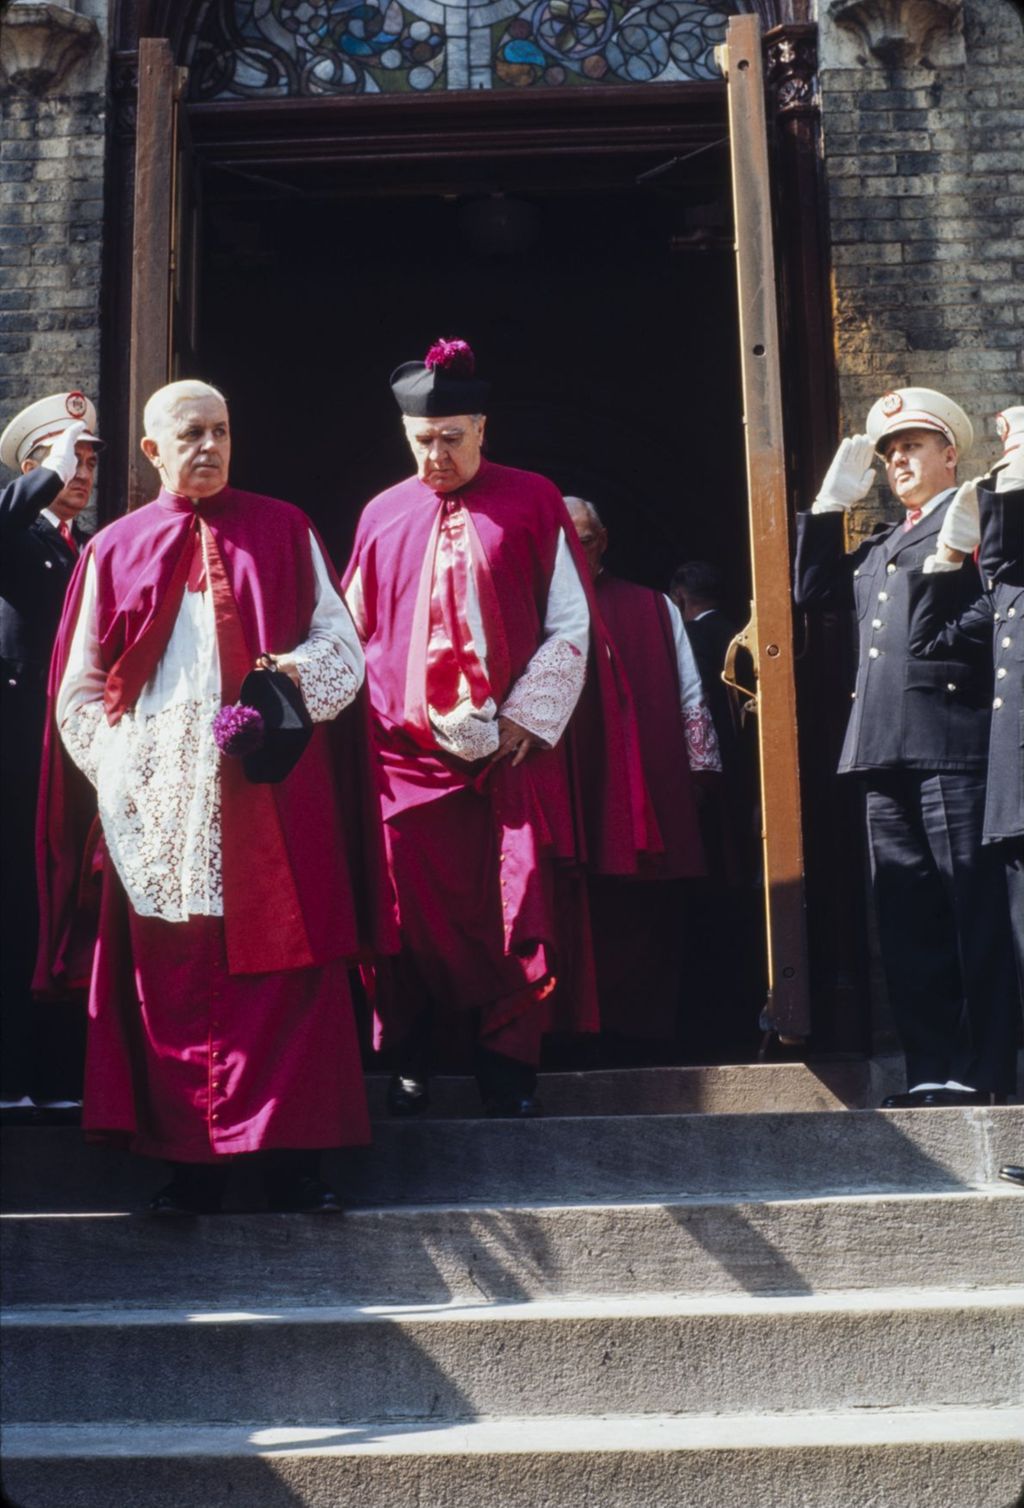 St. Patrick's Day in Chicago, 1966, members of the clergy leaving Old St. Patrick's Church